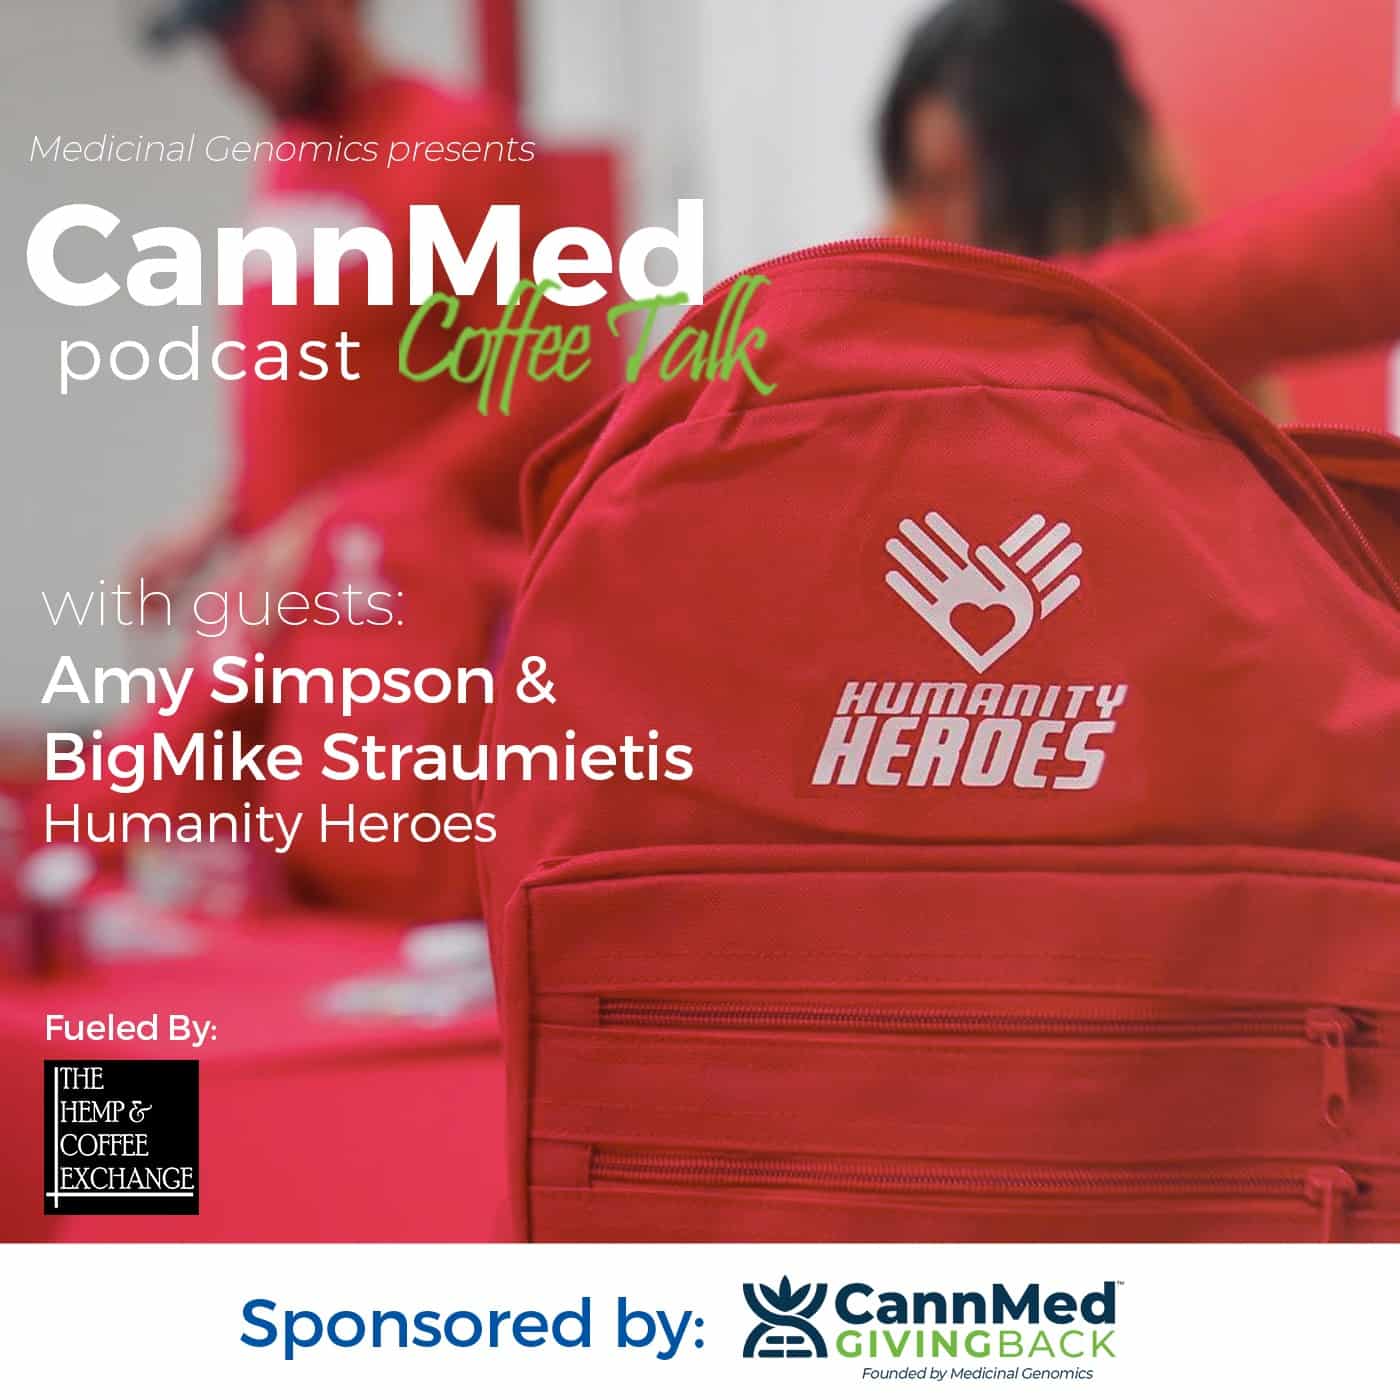 Featured image for “Helping the Homeless with Humanity Heroes”